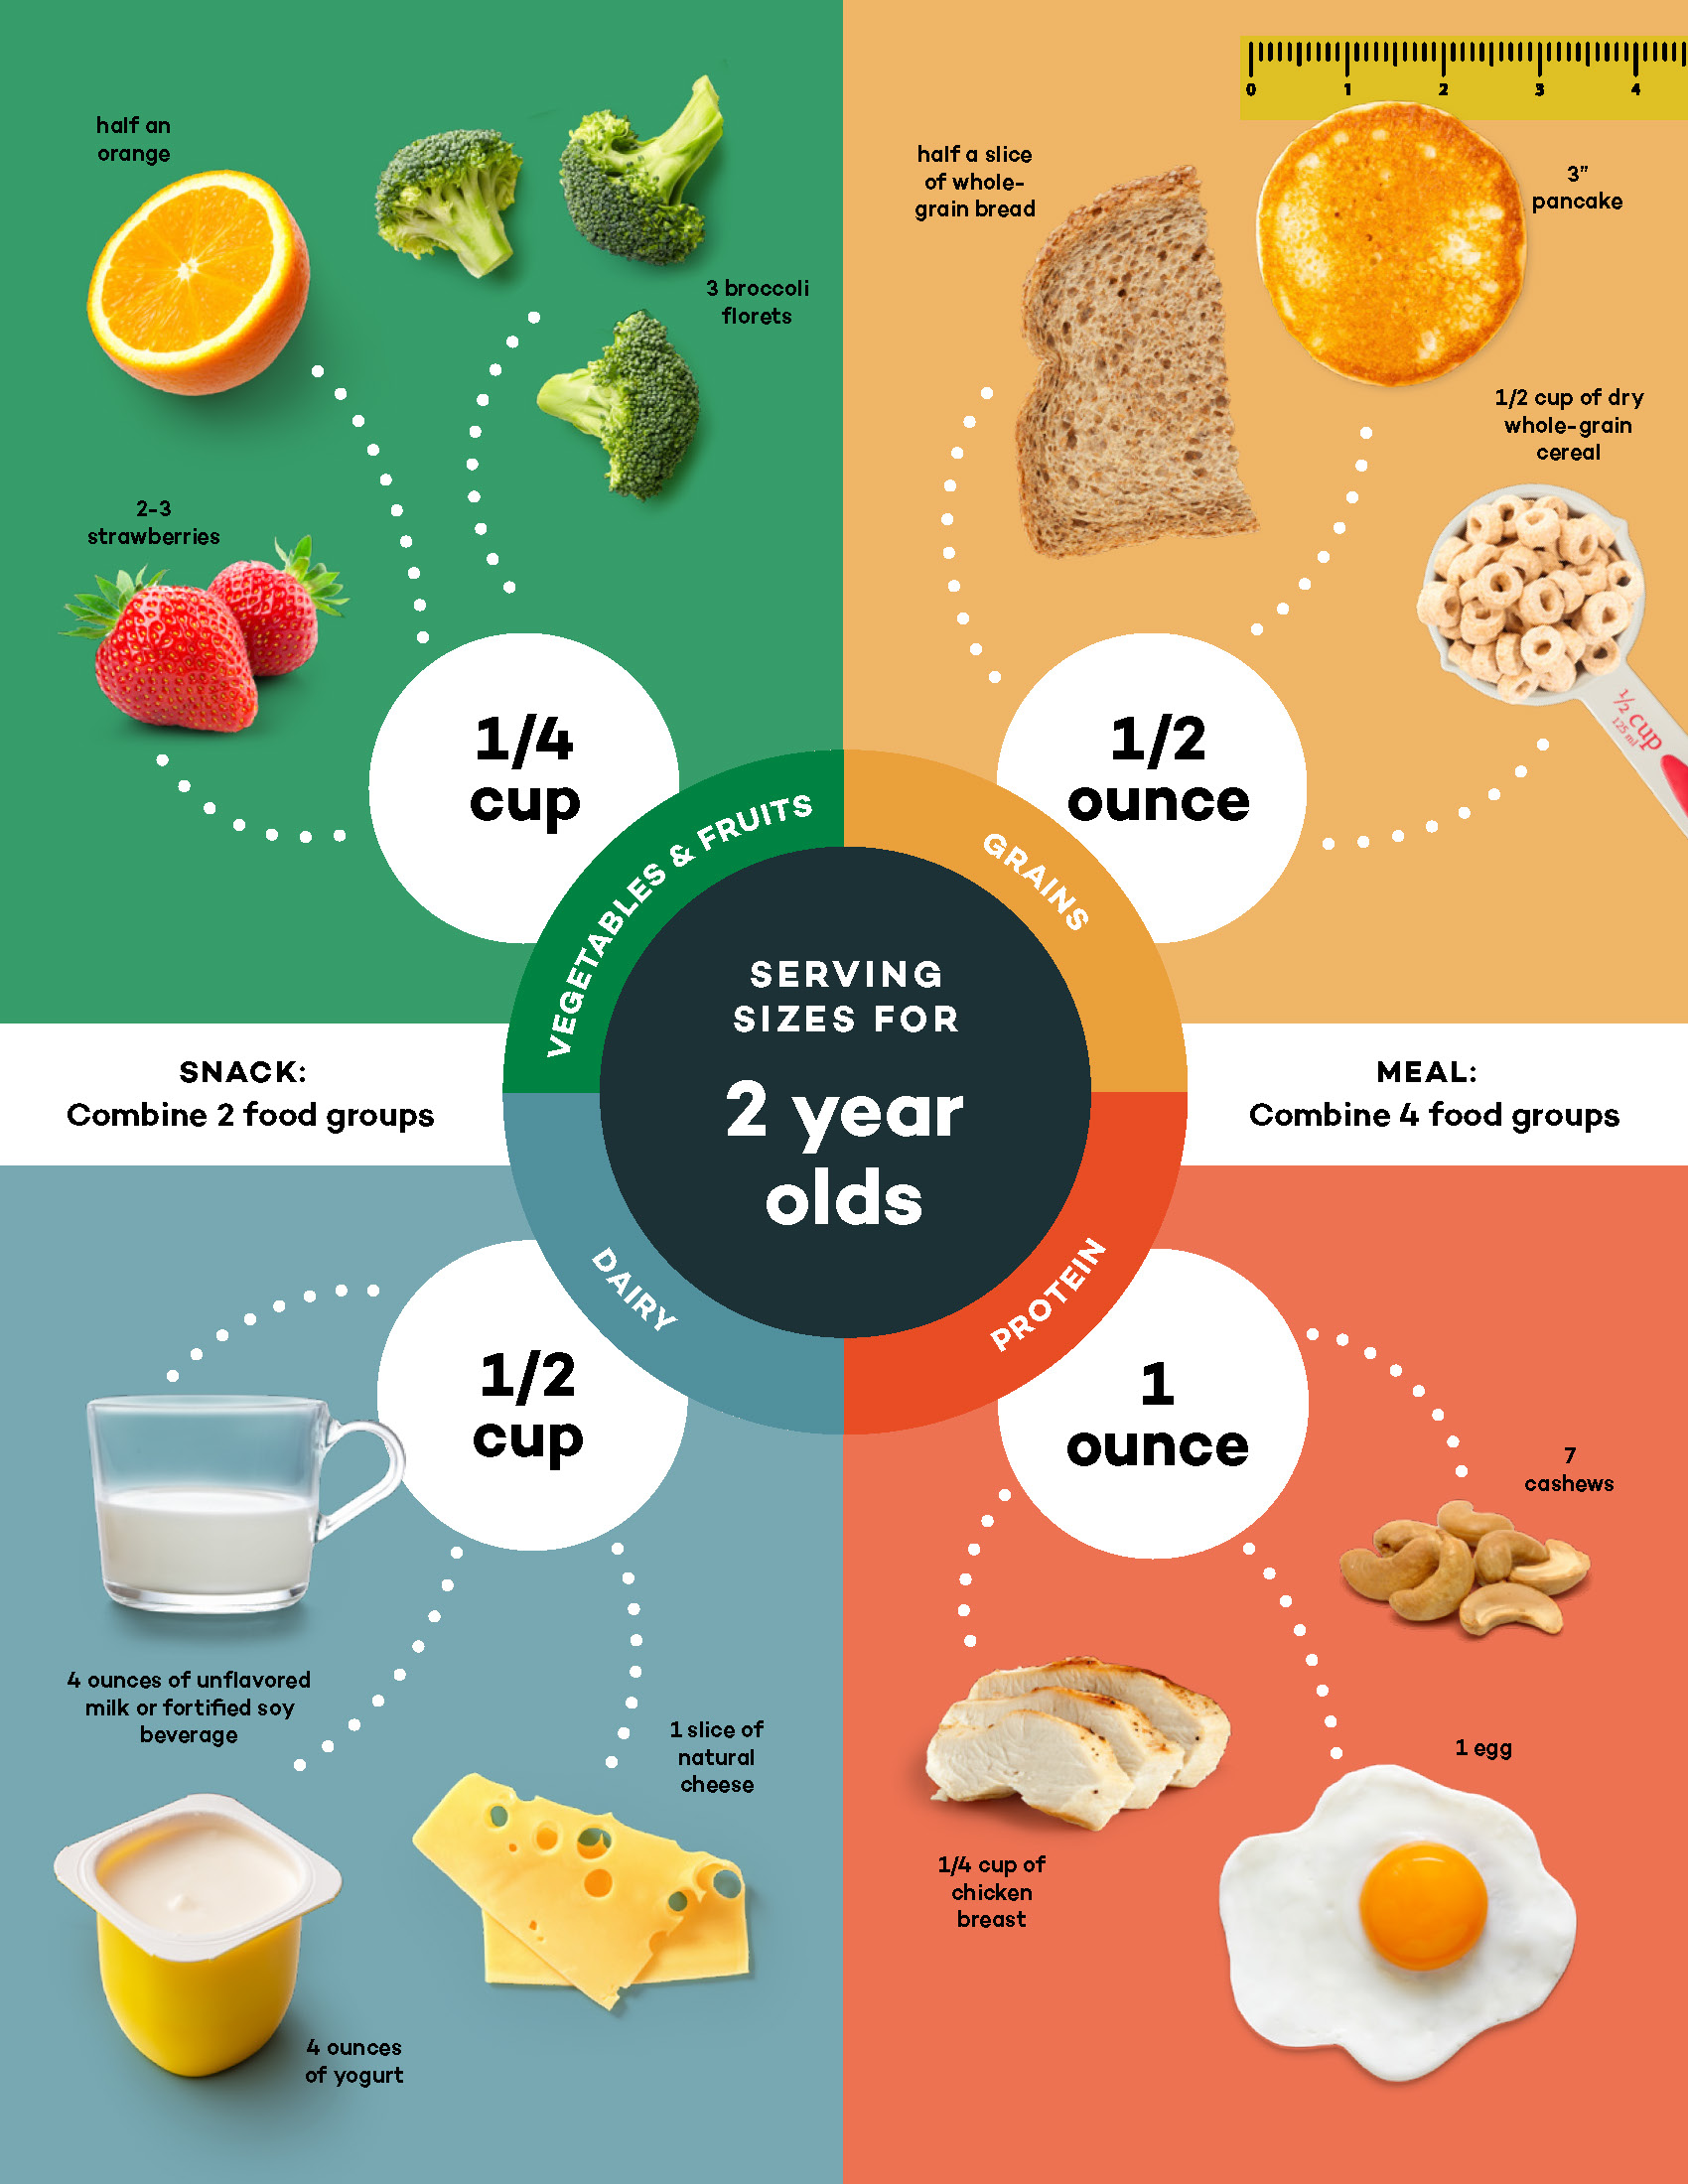 Healthy Eating Habits for Babies